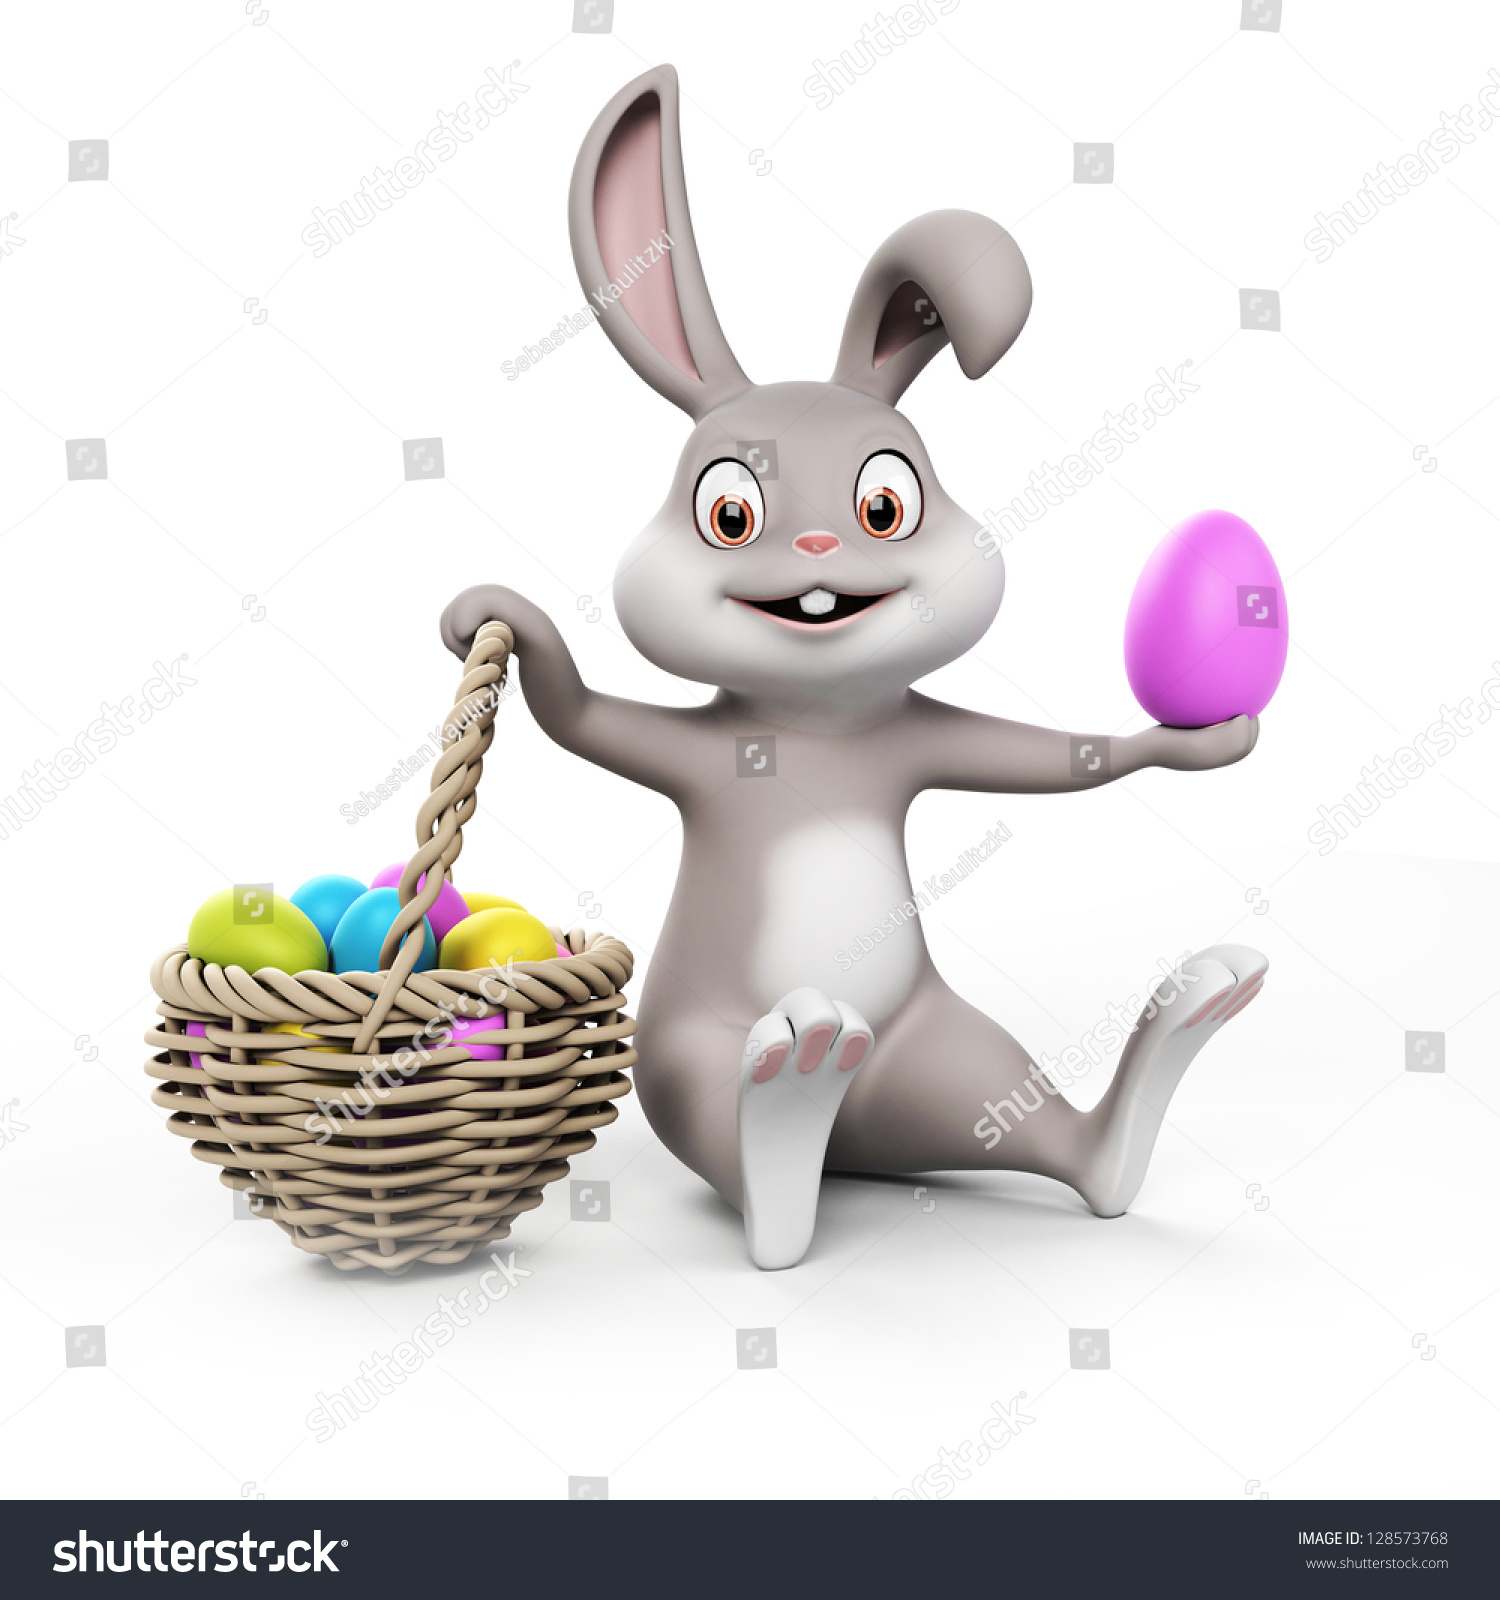 3d Rendering Of A Cute Easter Bunny Stock Photo 128573768 : Shutterstock